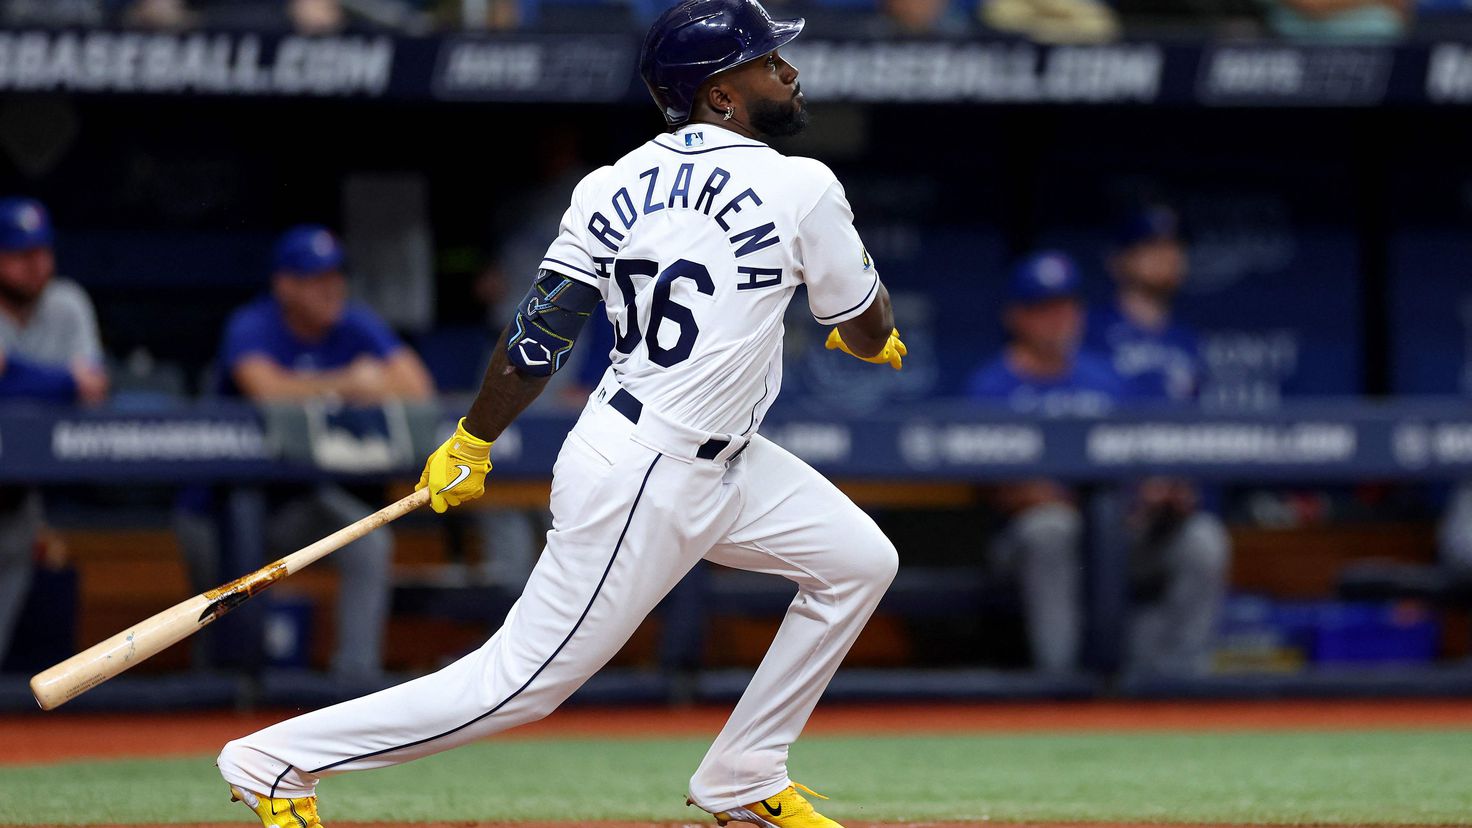 Tampa Bay Rays on pace to break MLB all-time home run record
